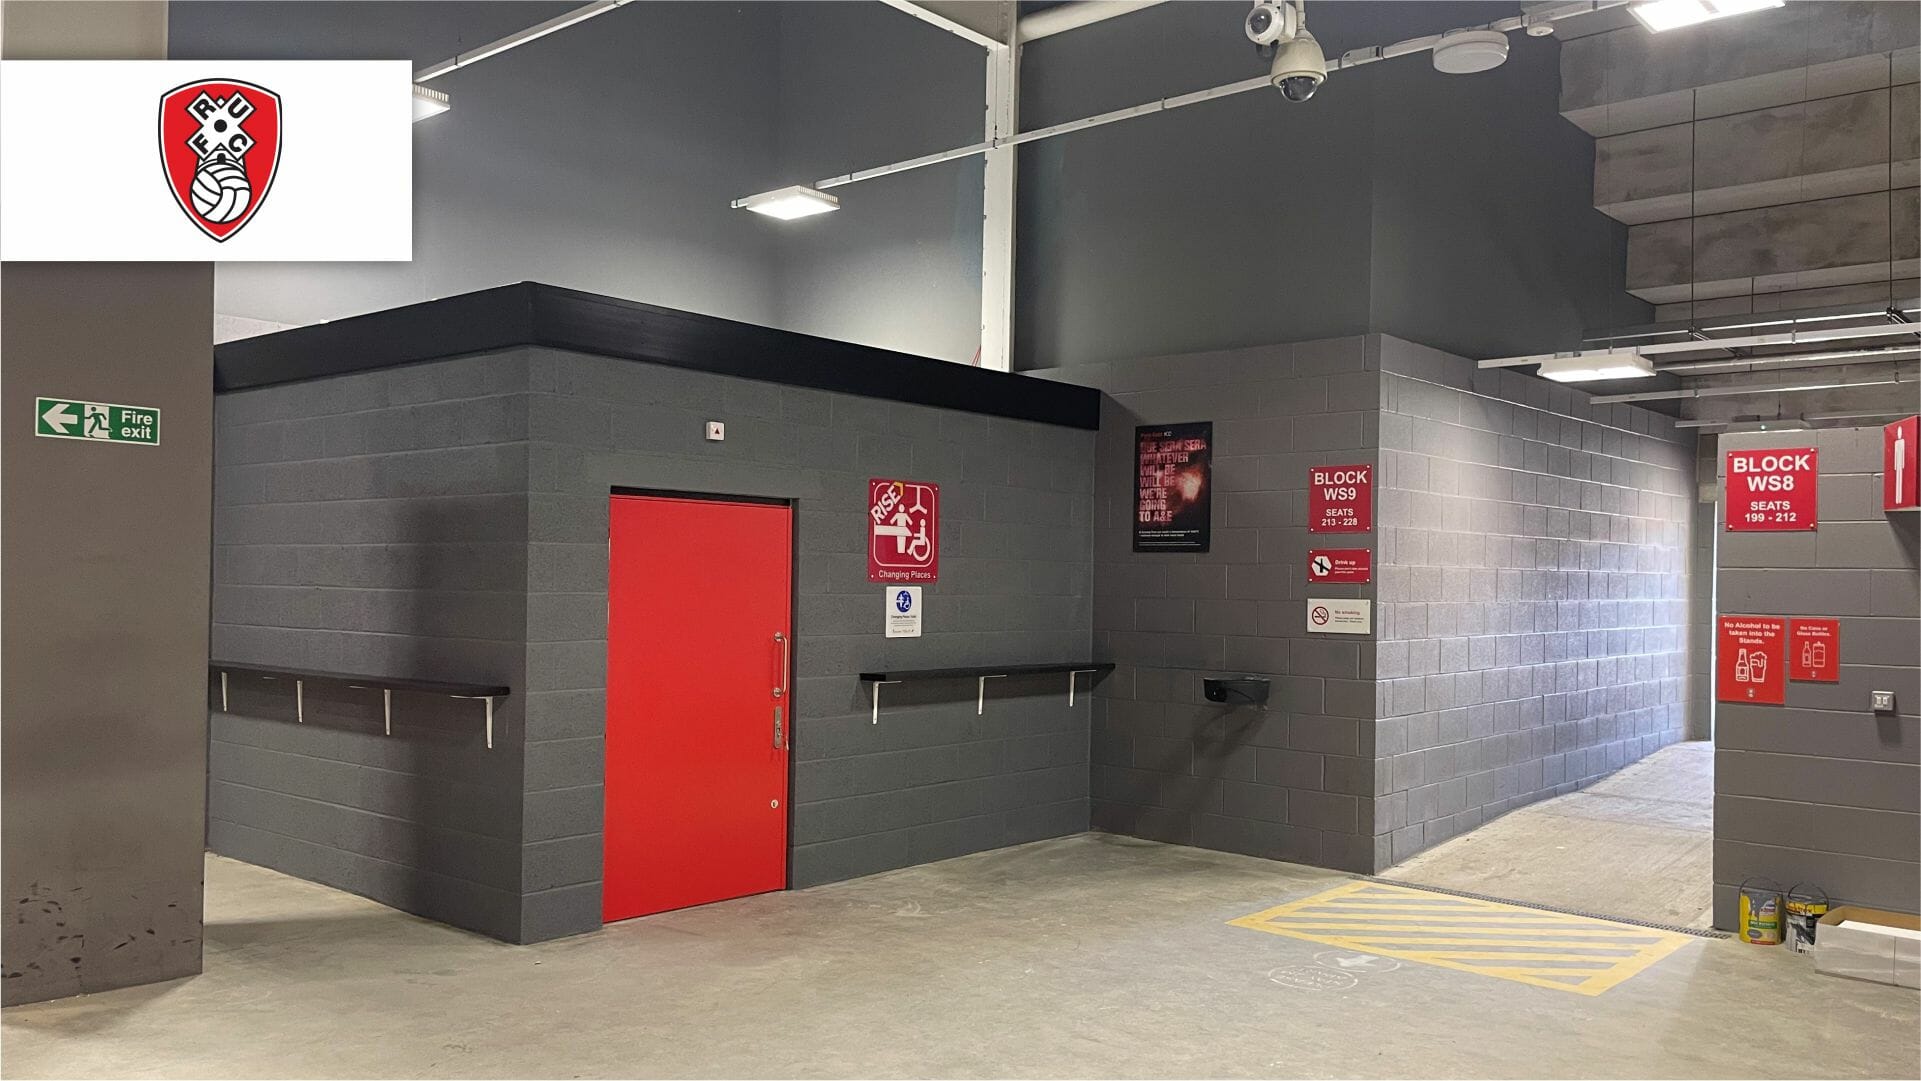 New Changing Places toilet installed at Rotherham United